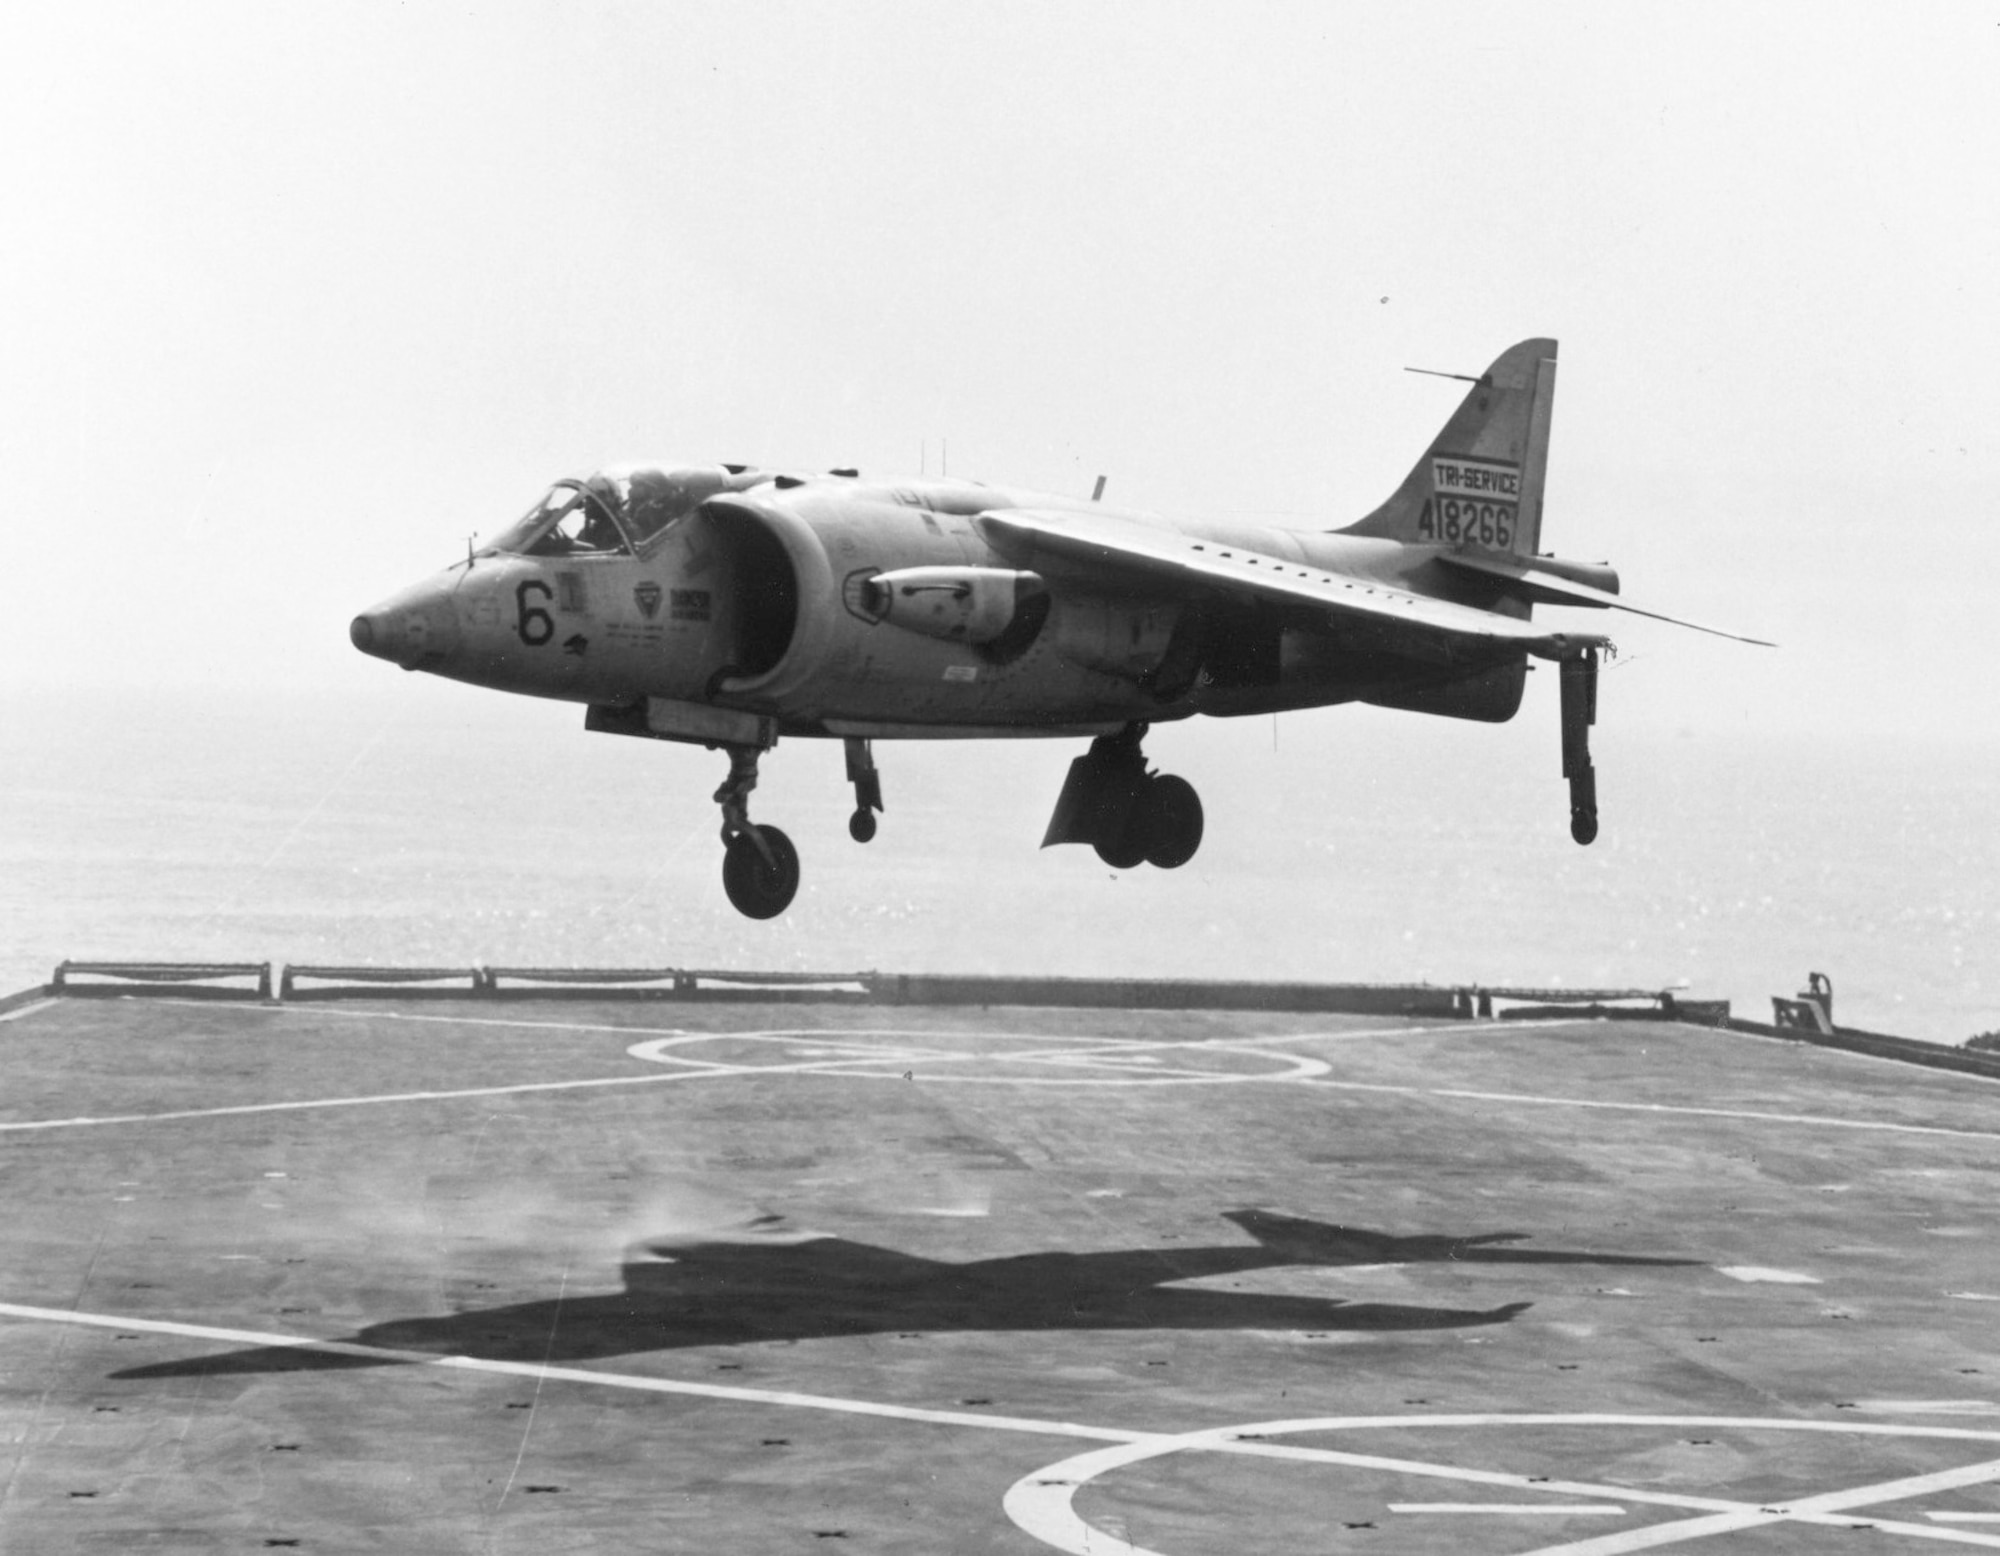 The Kestrel could operate from grass, semi-prepared surfaces, or ship decks, offering great operational flexibility. Four adjustable exhaust nozzles beneath the wing rotated to provide thrust for vertical, backward or hovering flight as well as conventional forward movement. (U.S. Air Force photo)